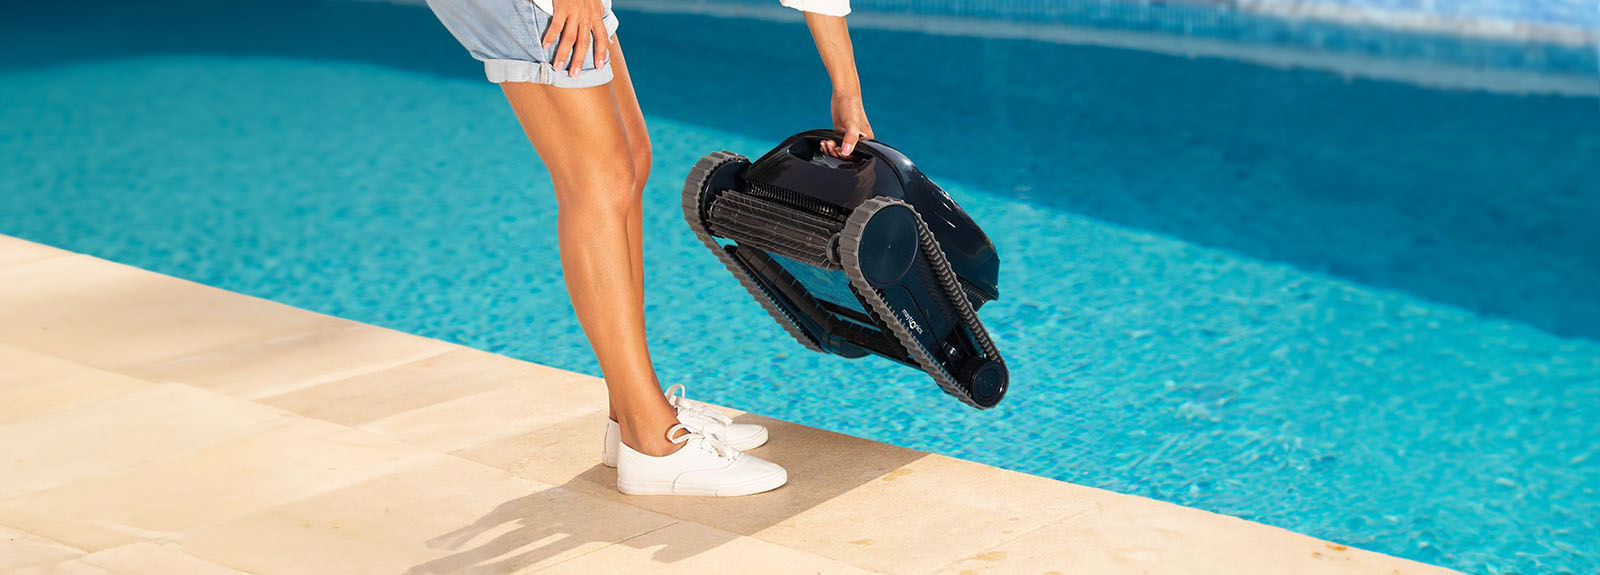 Cordless Pool Cleaners